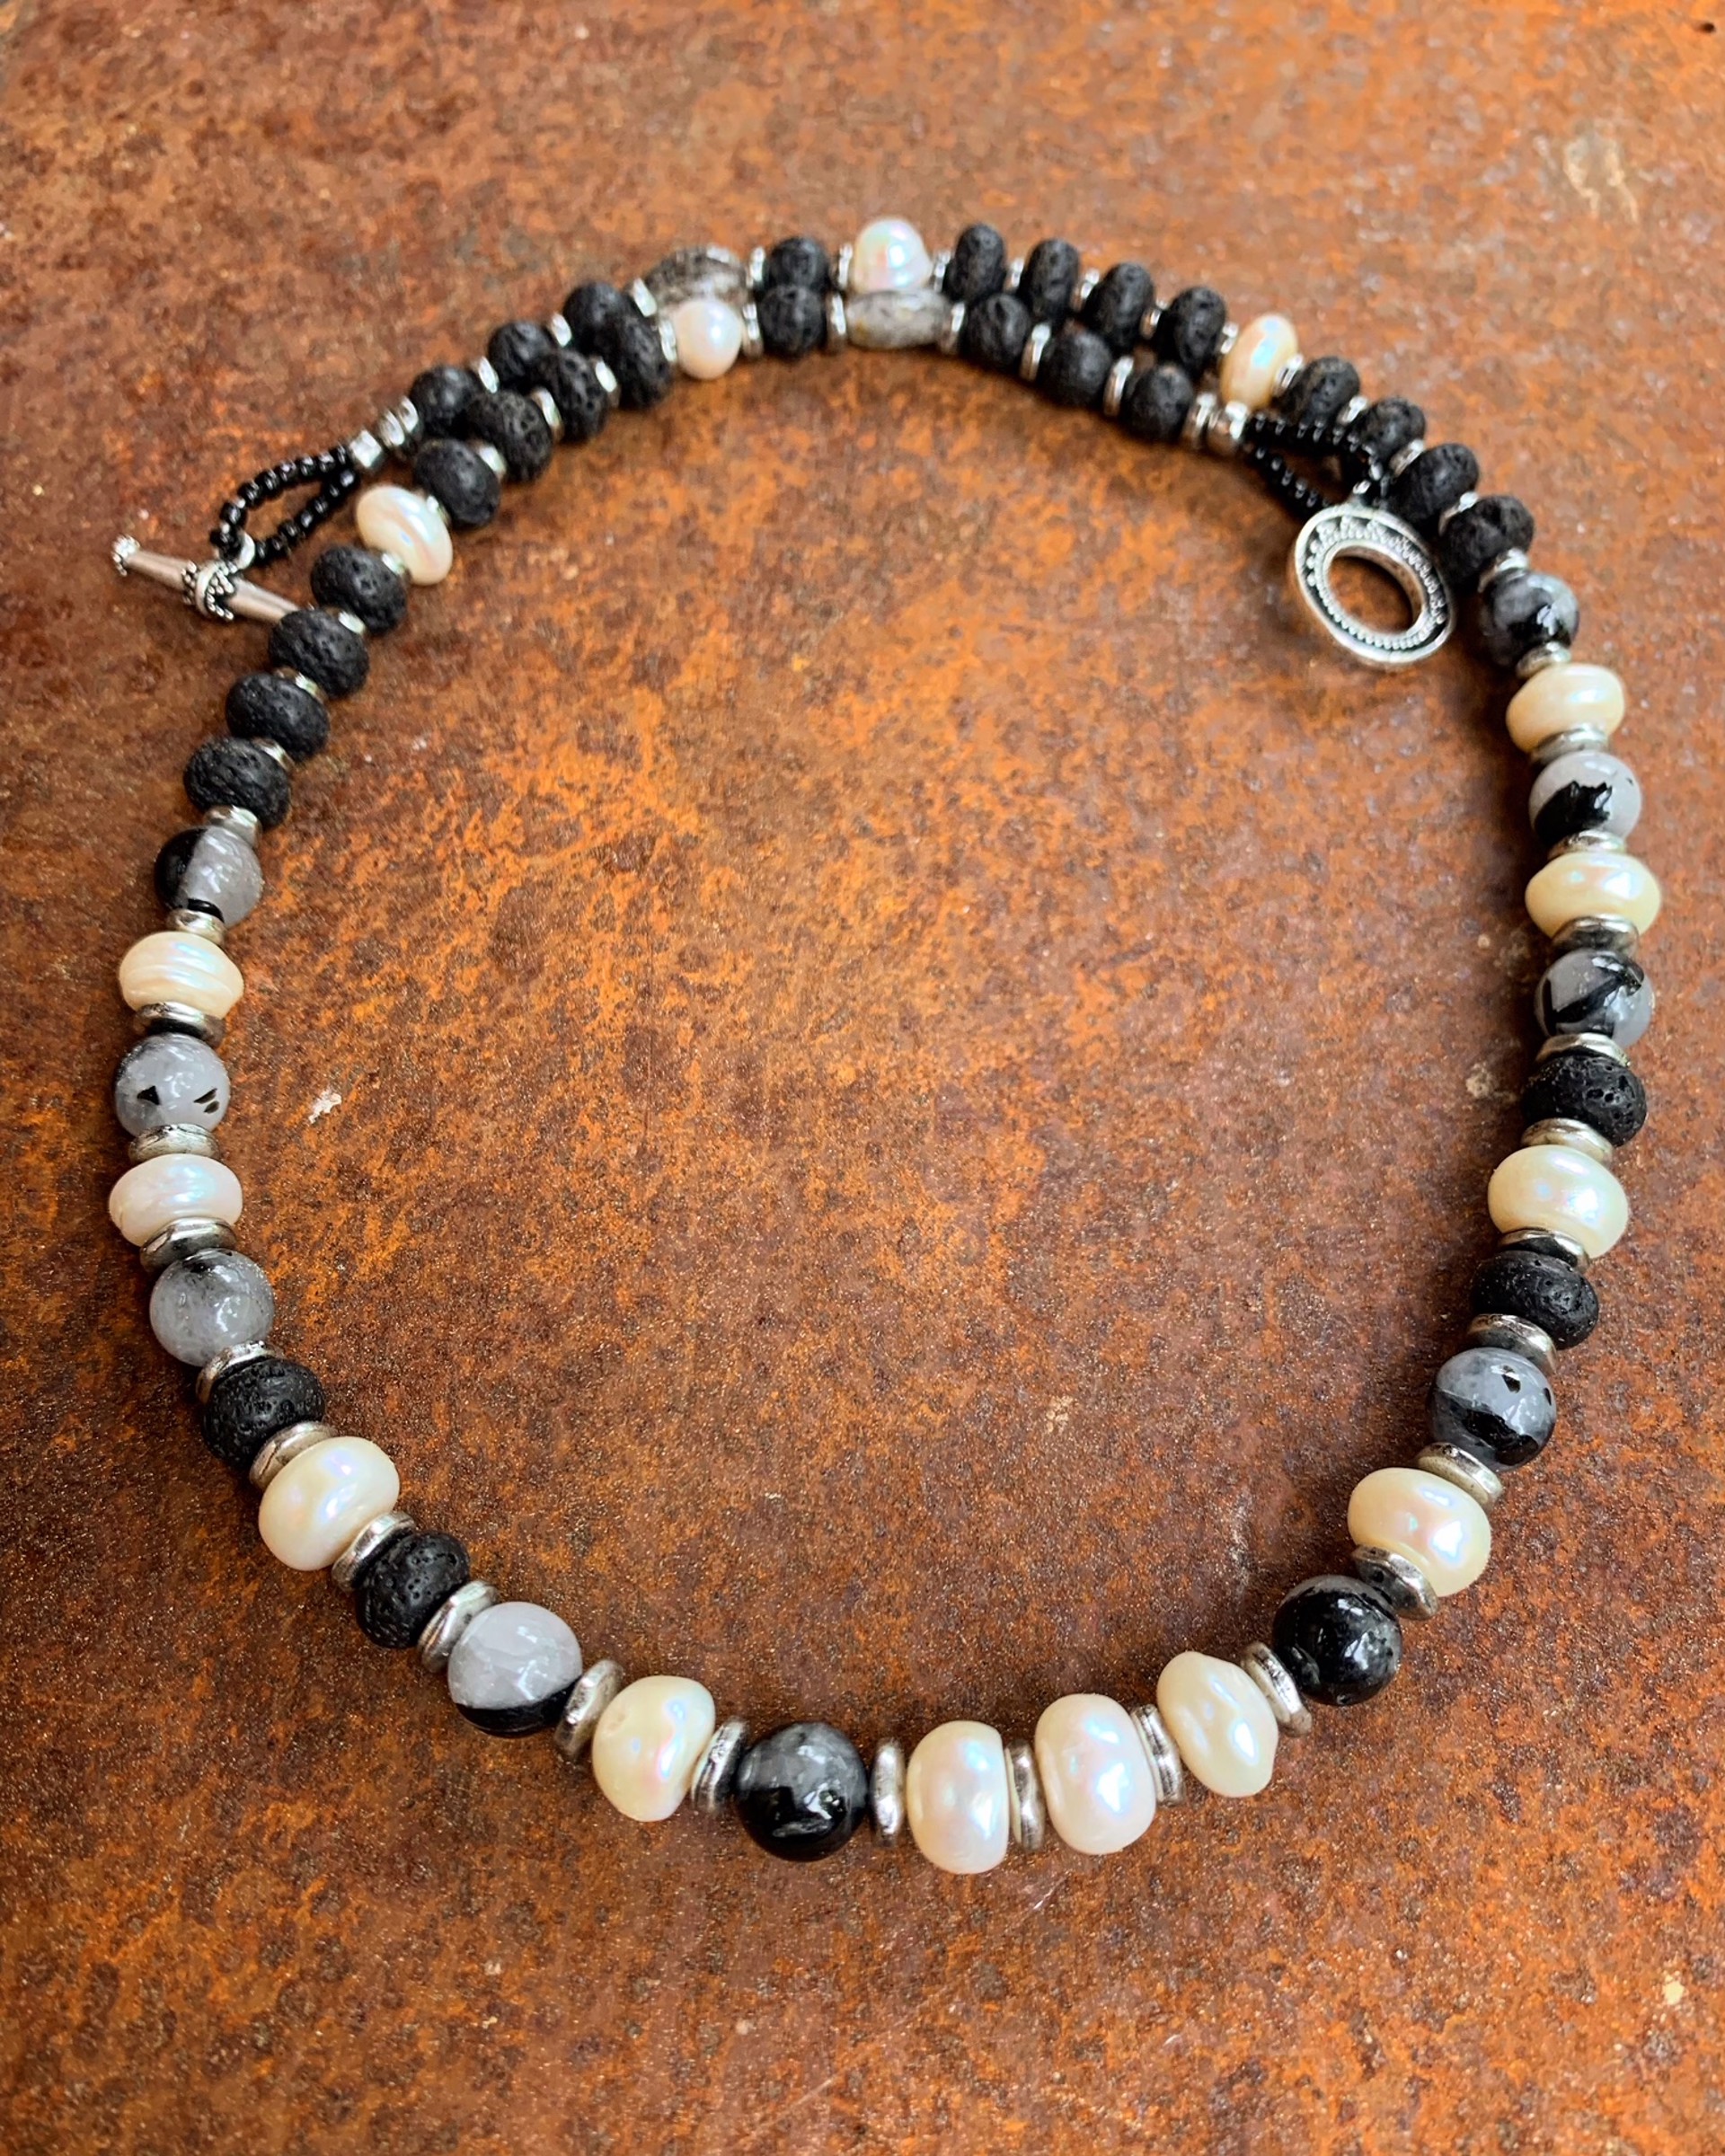 K858 Cultured Pearl Necklace with Lava and Rutilated Quartz by Kelly Ormsby